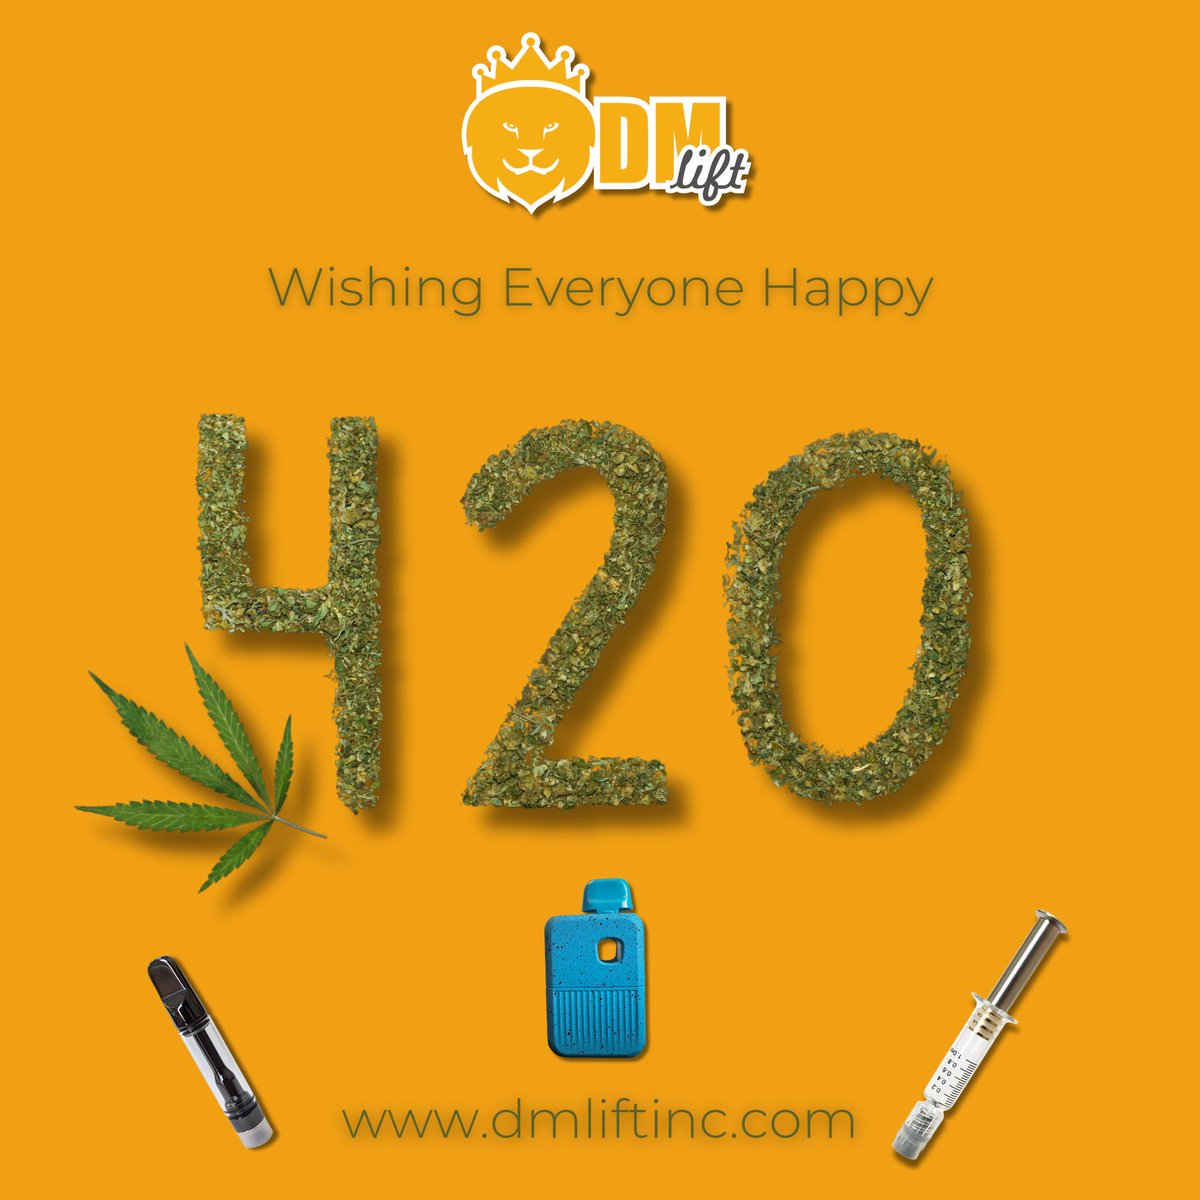 Happy 420, everyone! 🤙🍃

#Happy420 #GoodVibesOnly #April20th #CannabisCommunity #CannabisIndustry #CannabisSociety #Cannabis #CannabisBusiness #Dispensary #CounterCulture #CannabisCulture #DMlift #manufacturing #b2b #whitelabelhardware